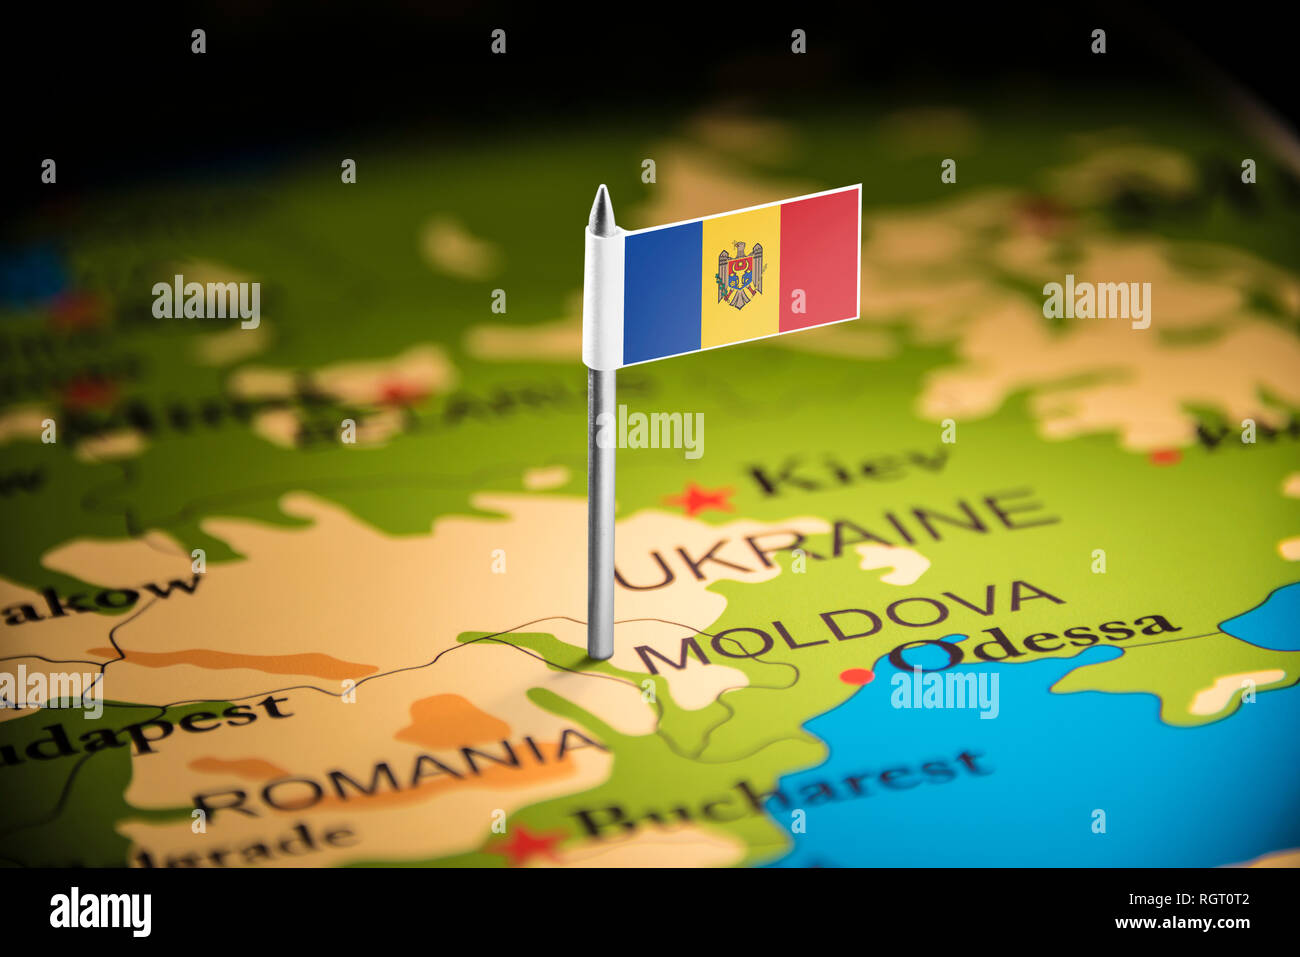 Moldova marked with a flag on the map Stock Photo